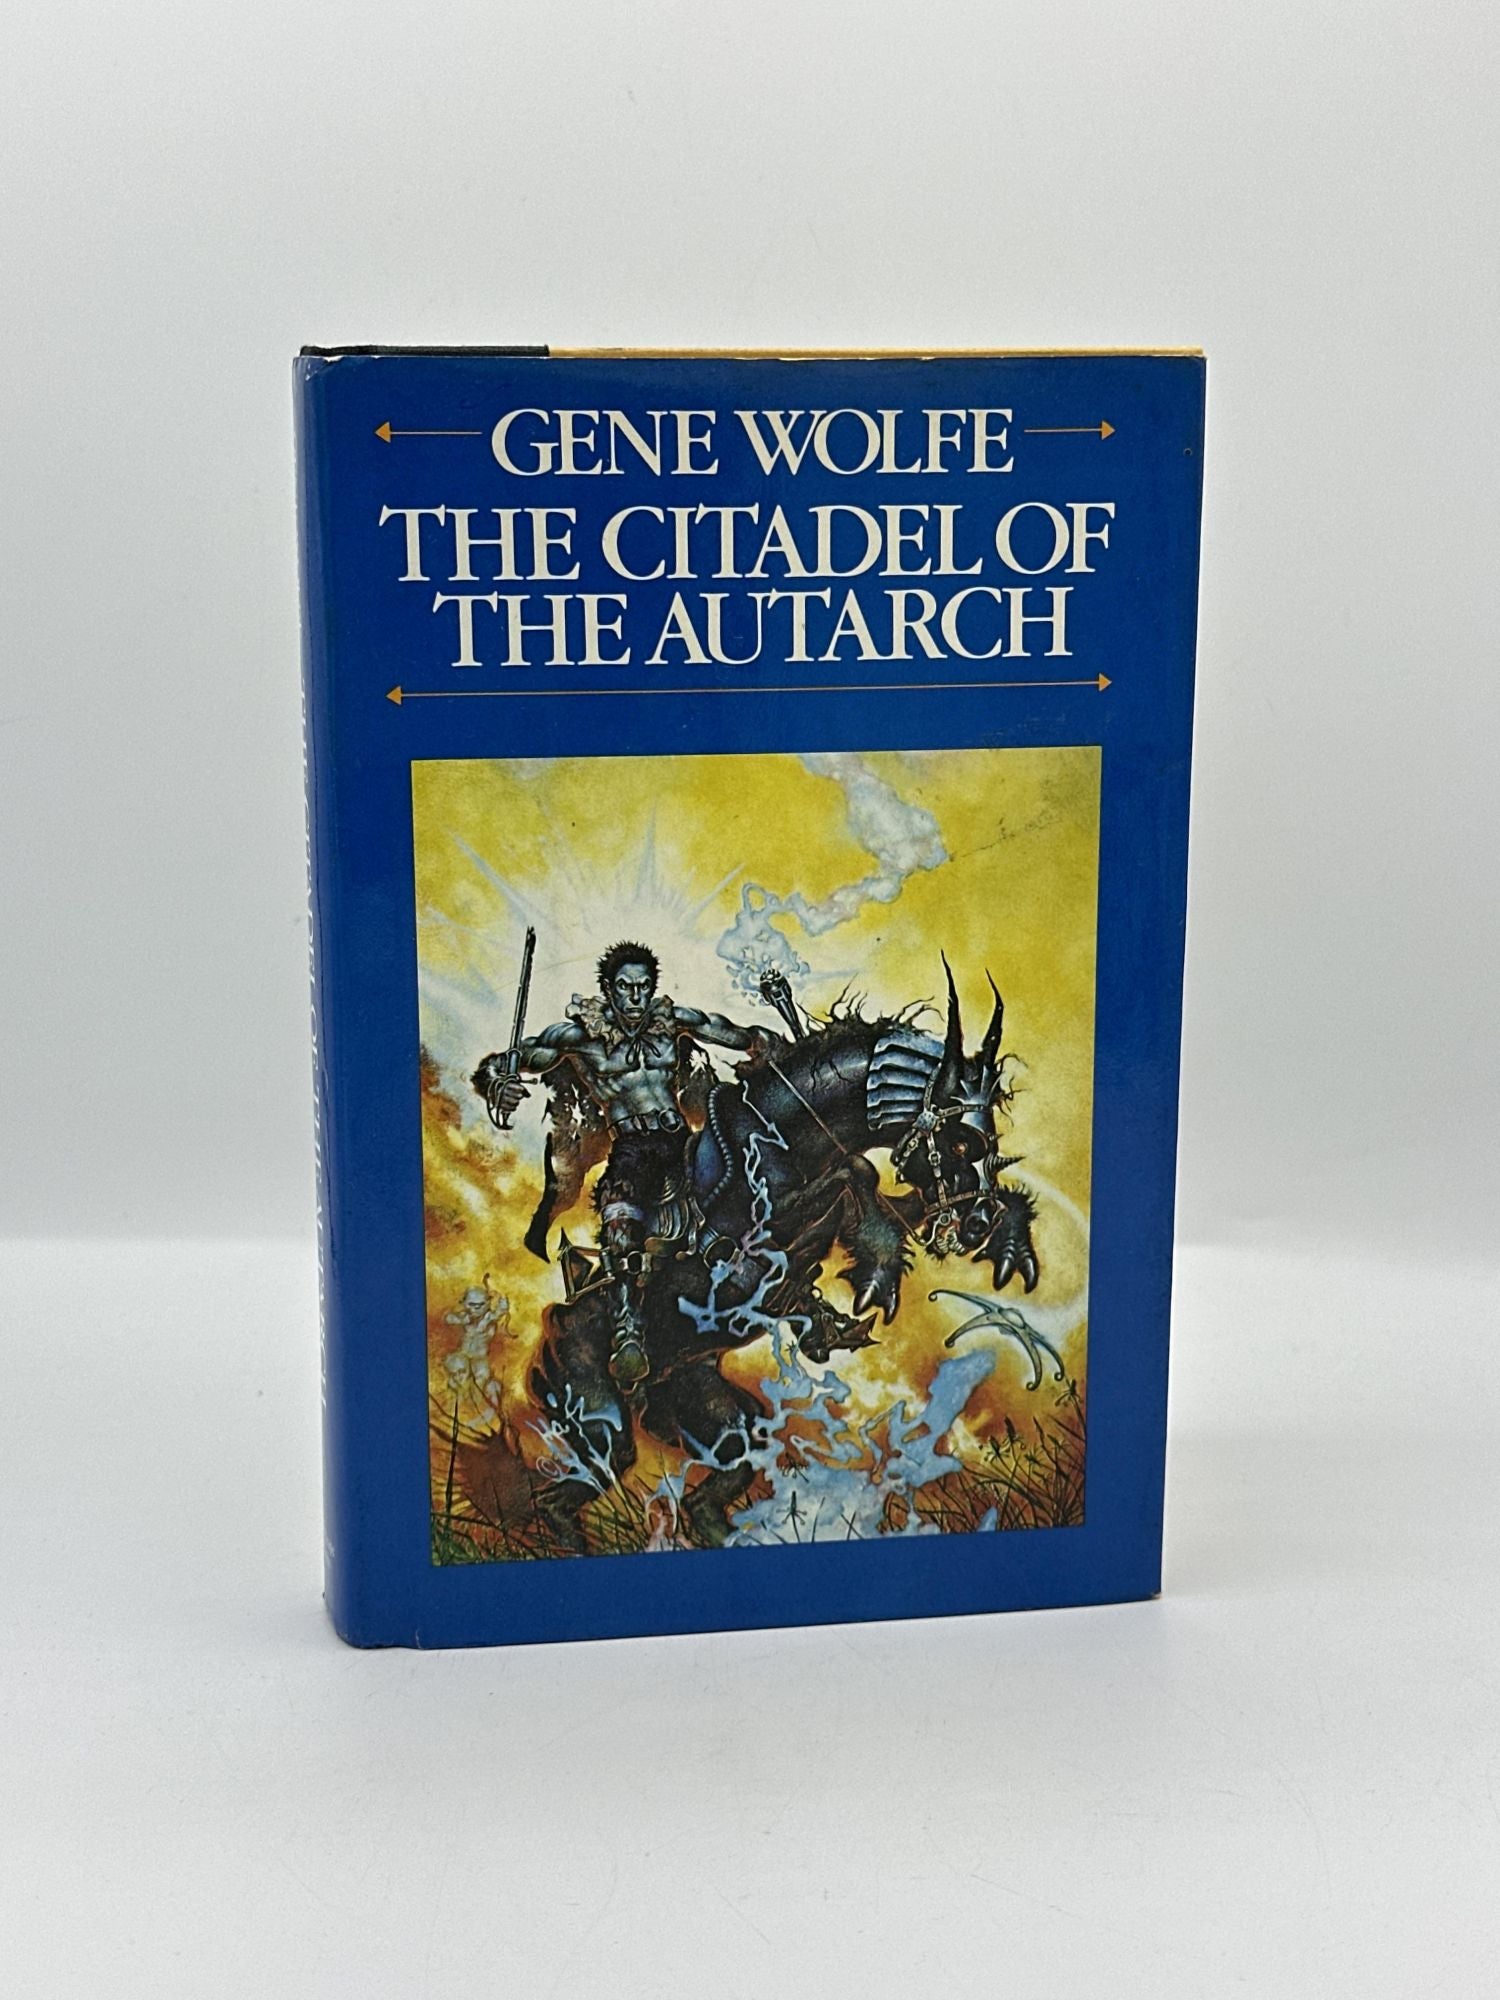 The Citadel of the Autarch. Gene Wolfe.